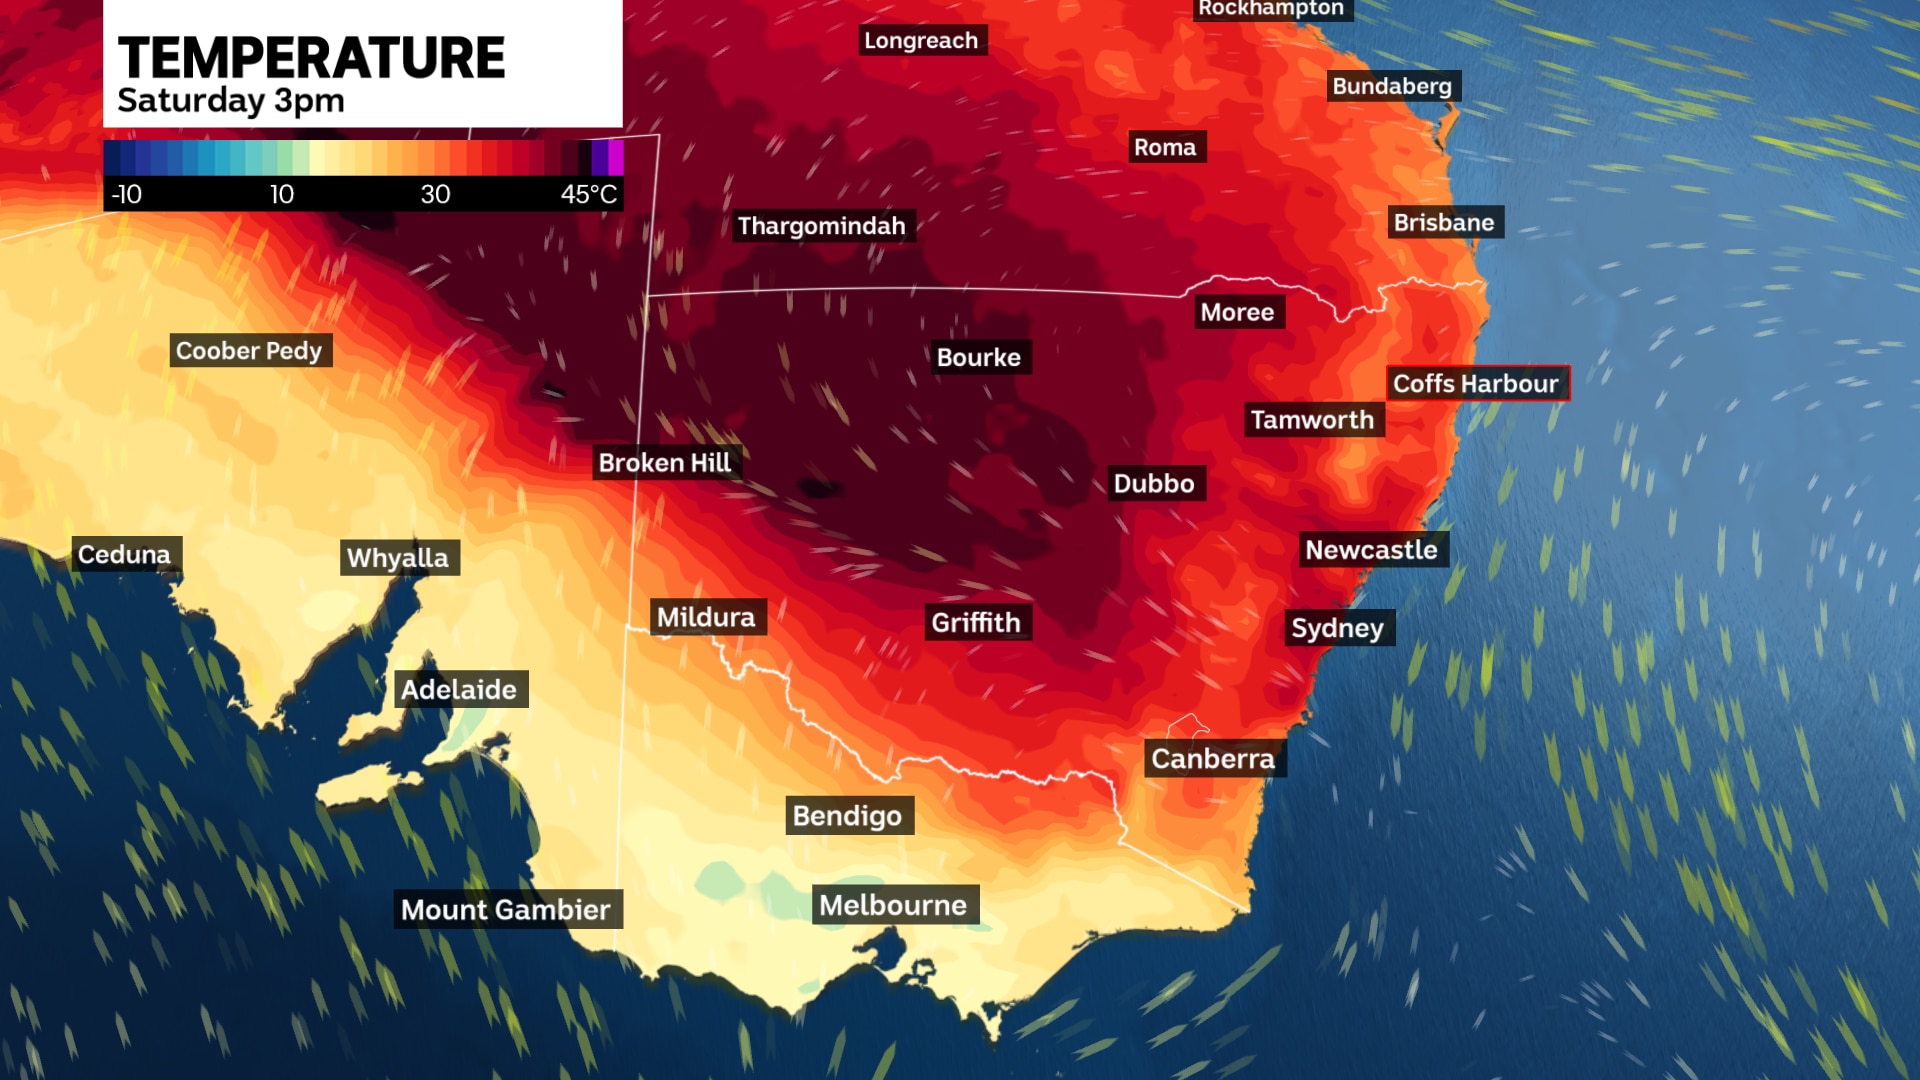 a weather map of new south wales showing the heatwave and high temperatures for saturday november 8